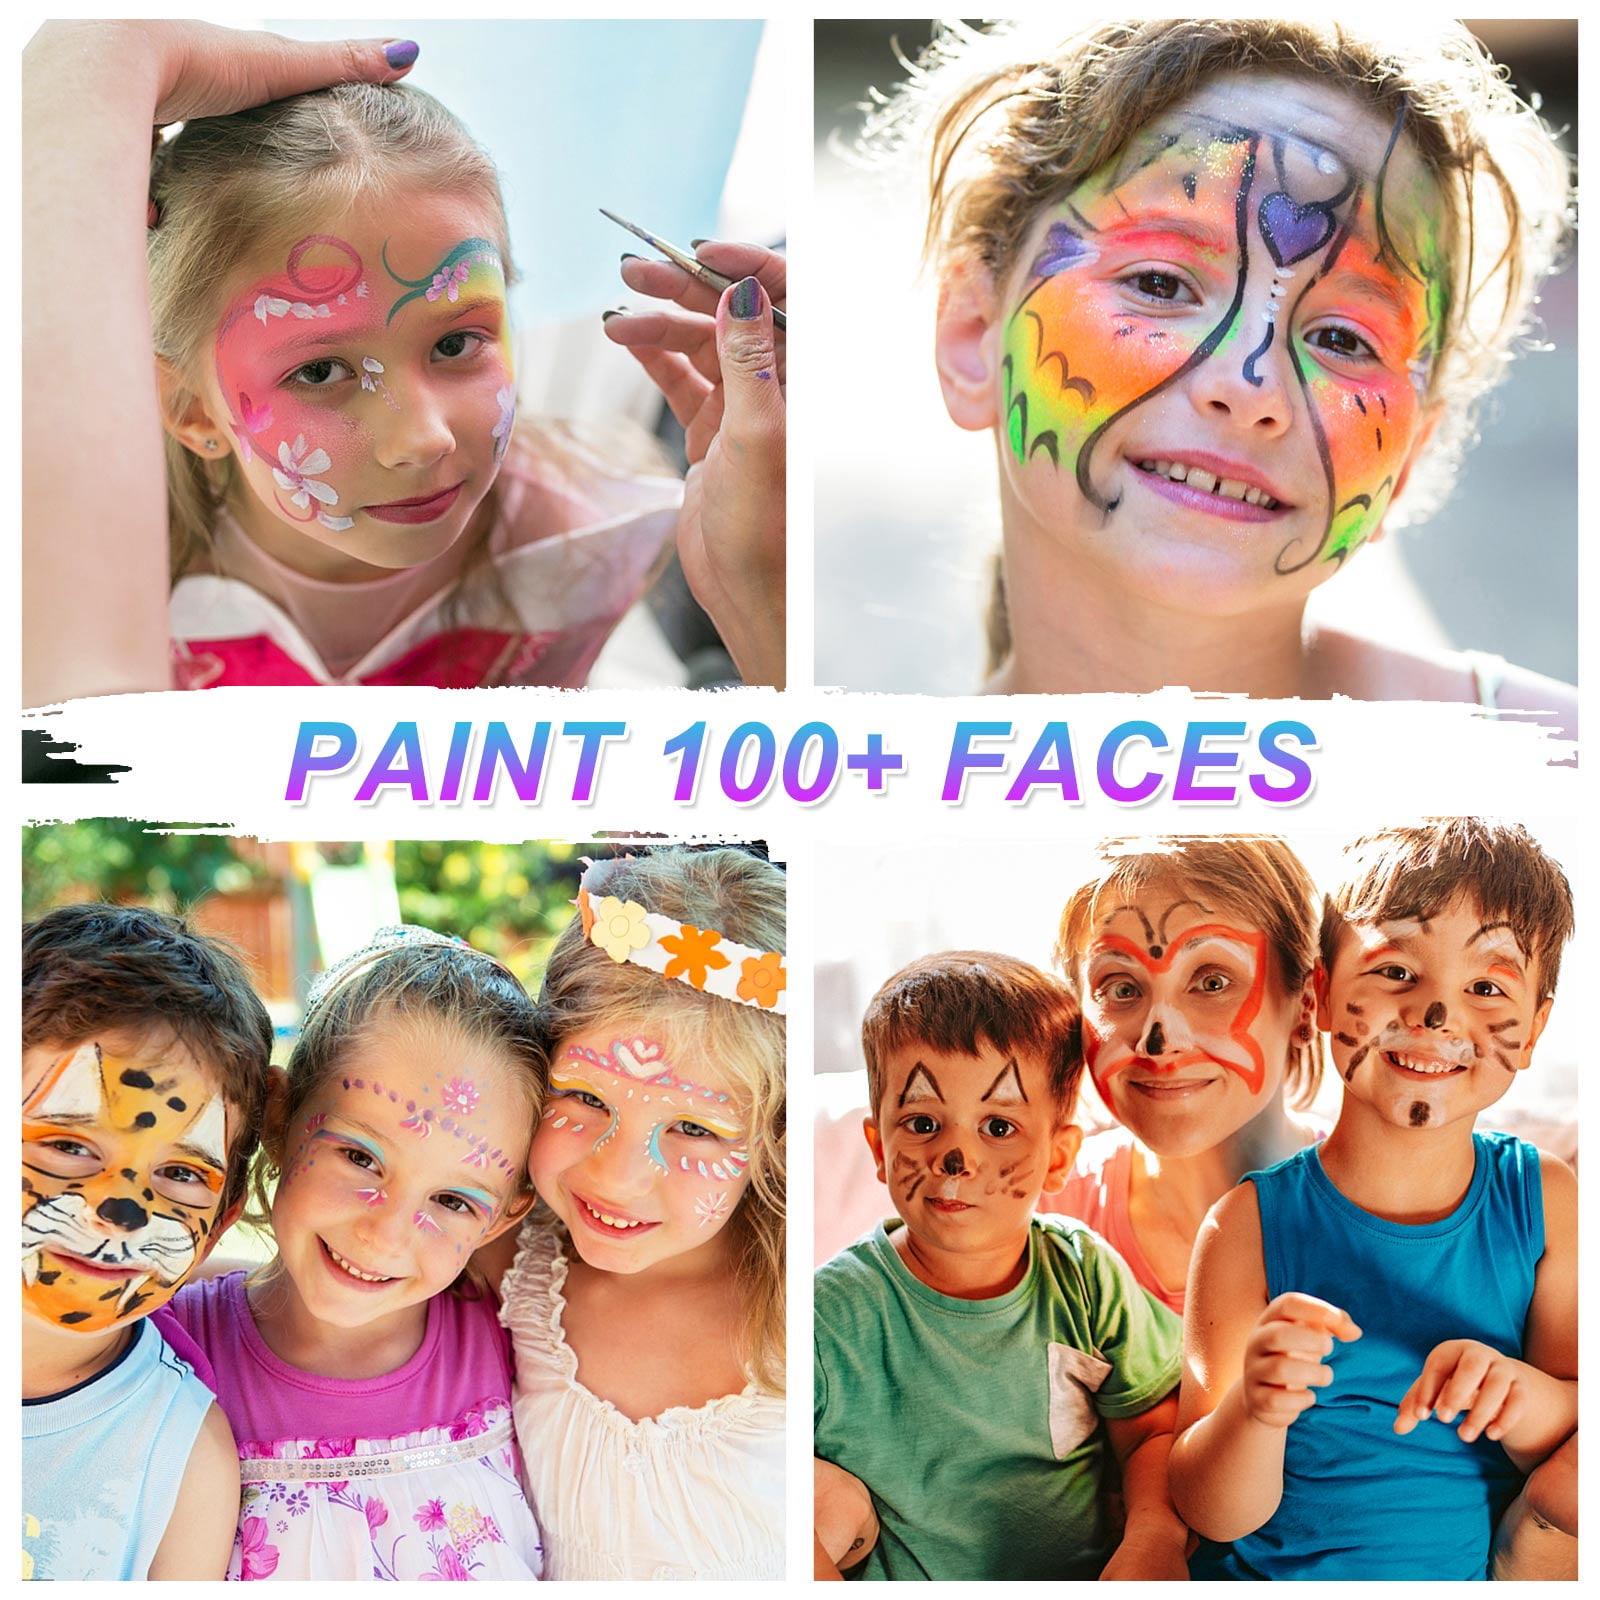 8 Color Face Body Paint Oil Painting Art Make Up Tool Professional Party Kit  #2 Arts And Crafts for Kids Ages 8-12 Girls Drawing 